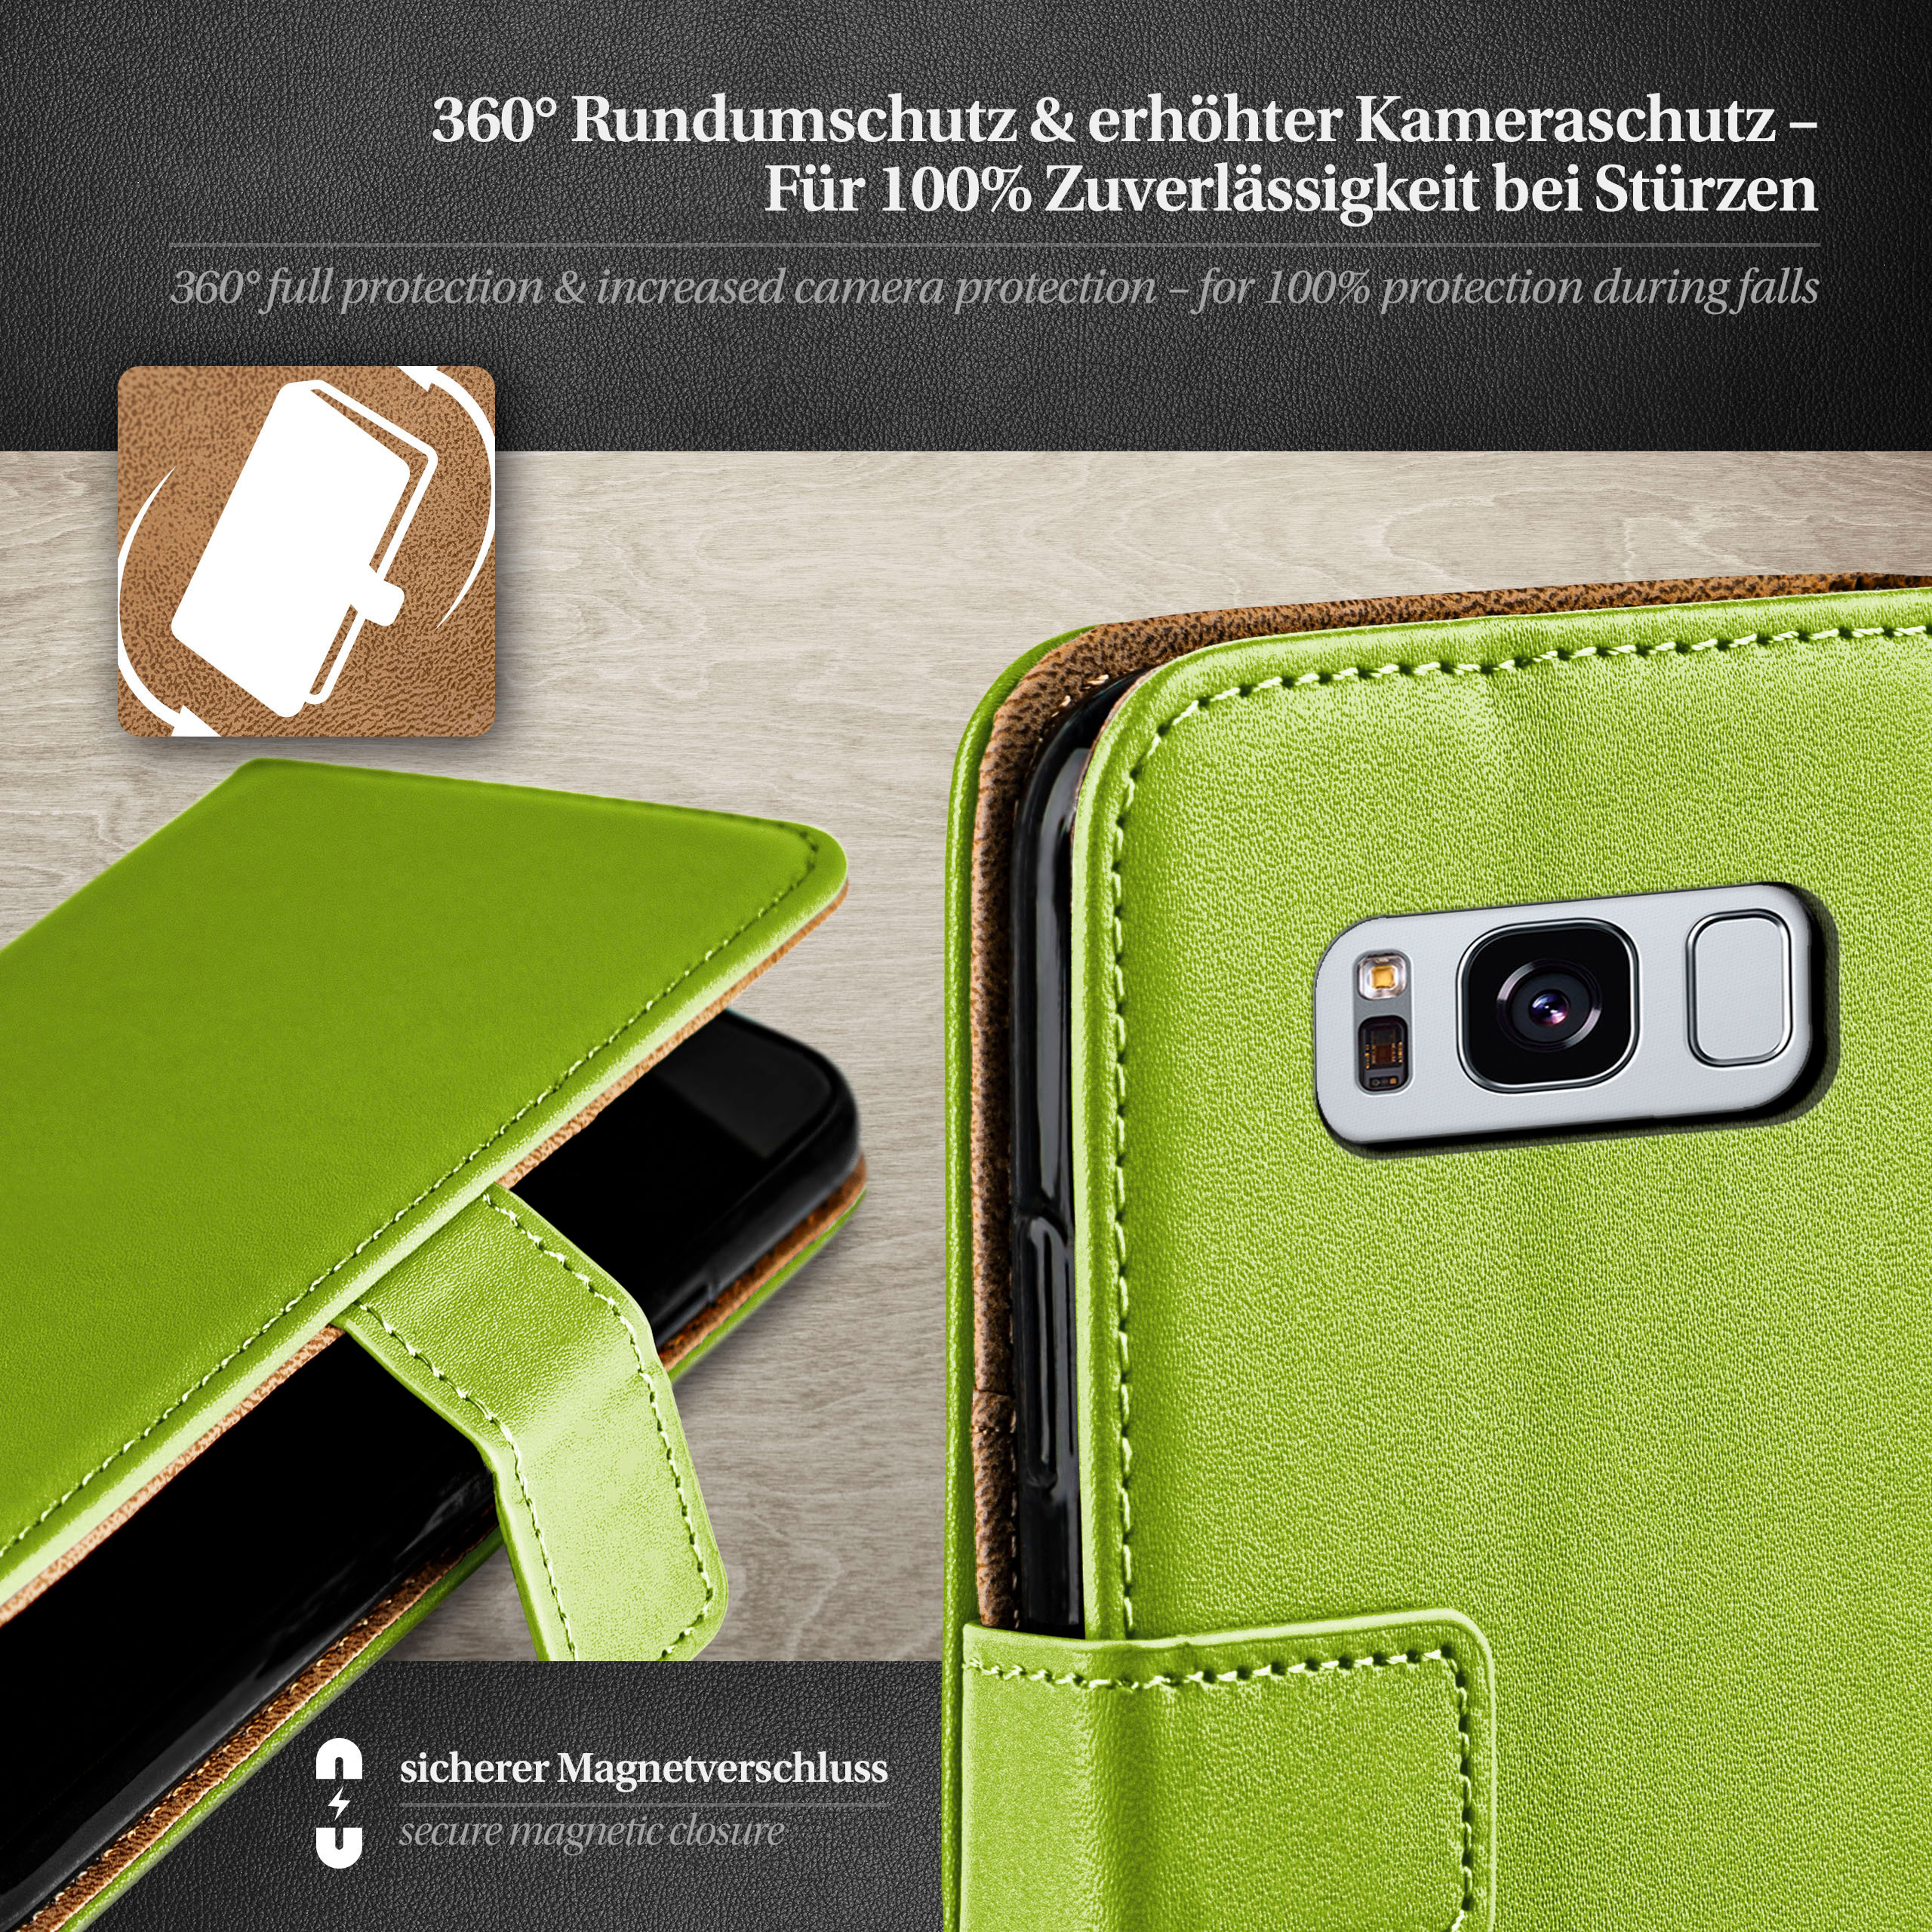 Plus, Book Samsung, Bookcover, Lime-Green Case, MOEX Galaxy S8